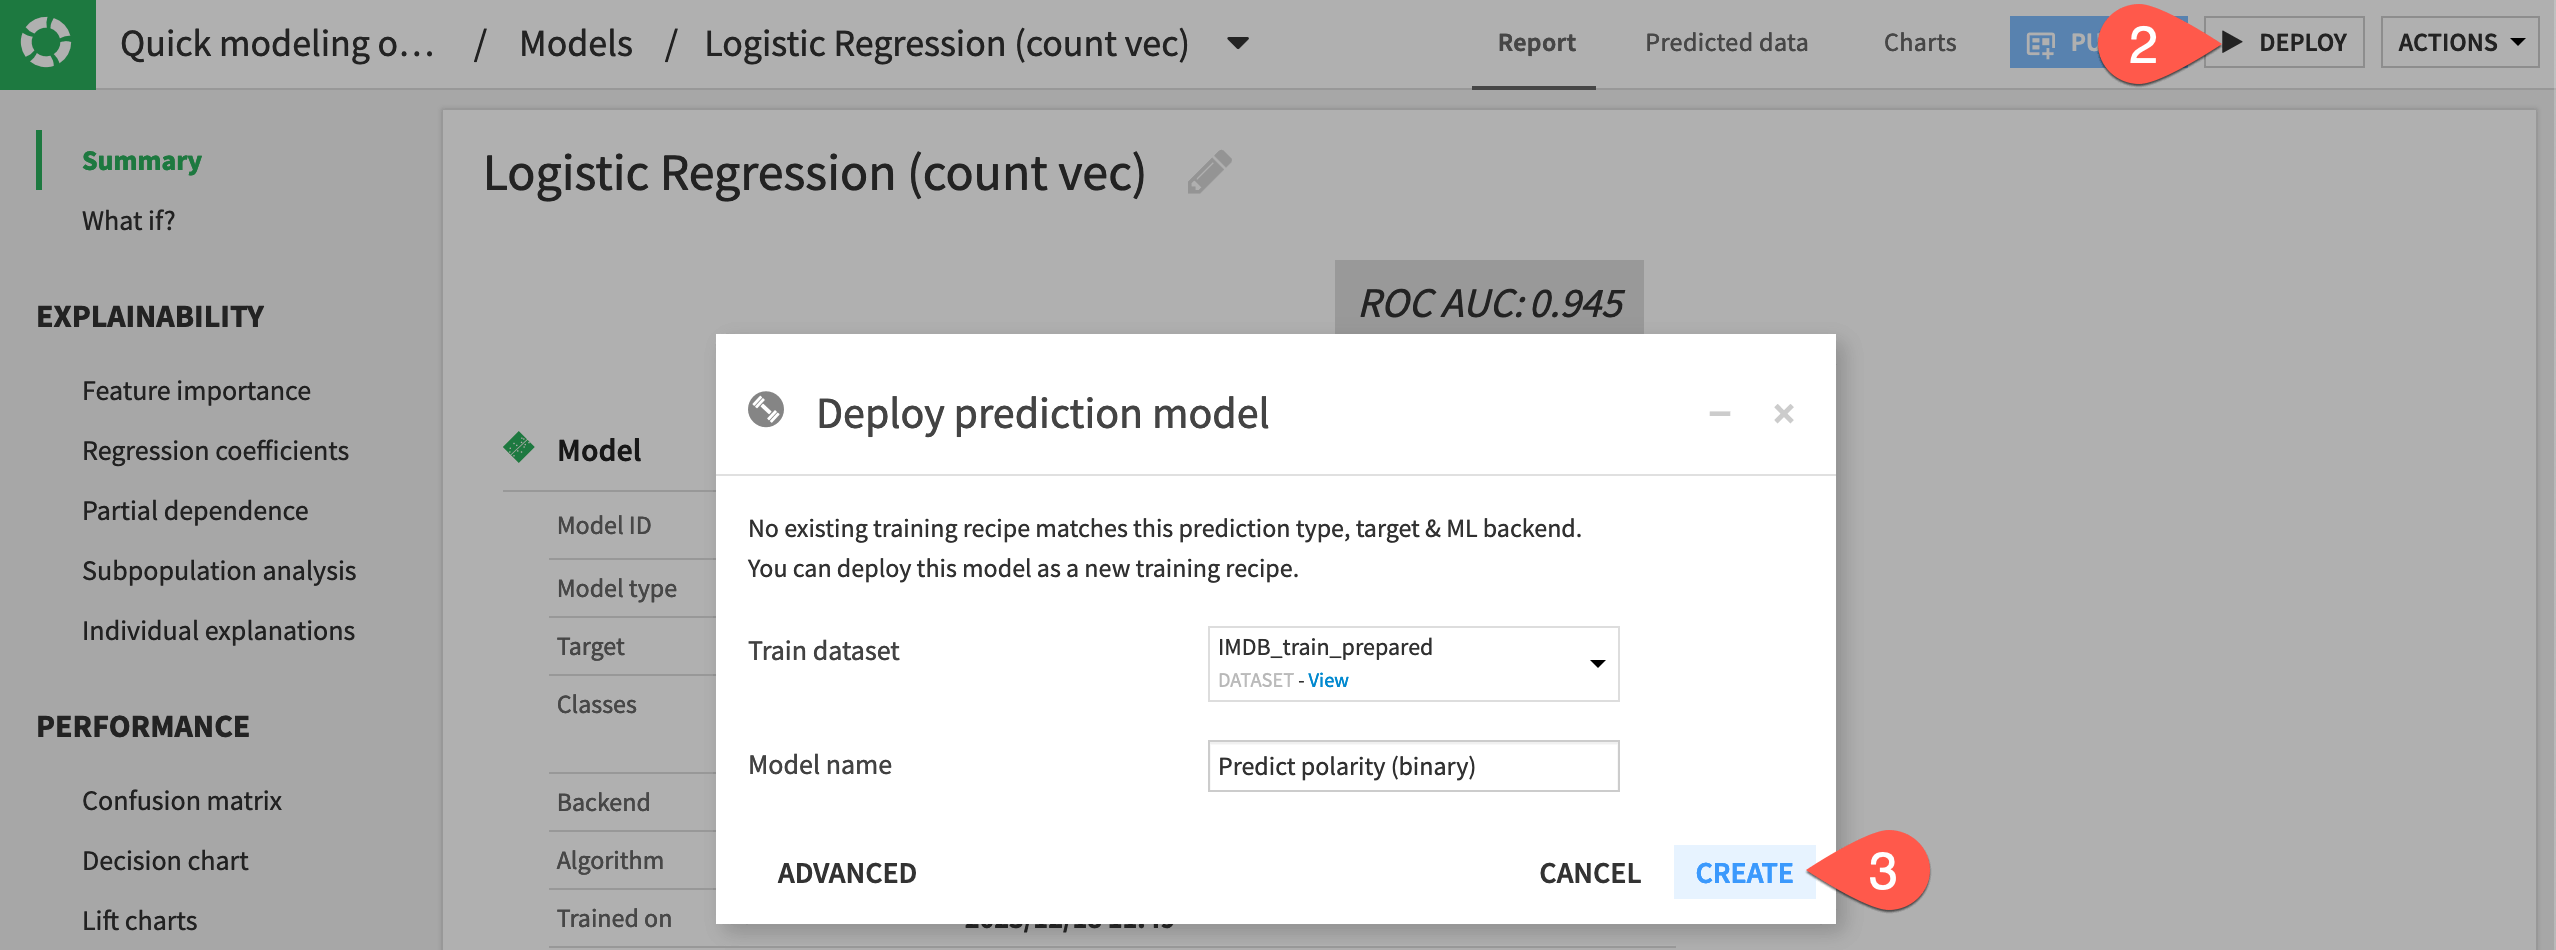 Dataiku screenshot of the dialog to deploy a model from the Lab to the Flow.